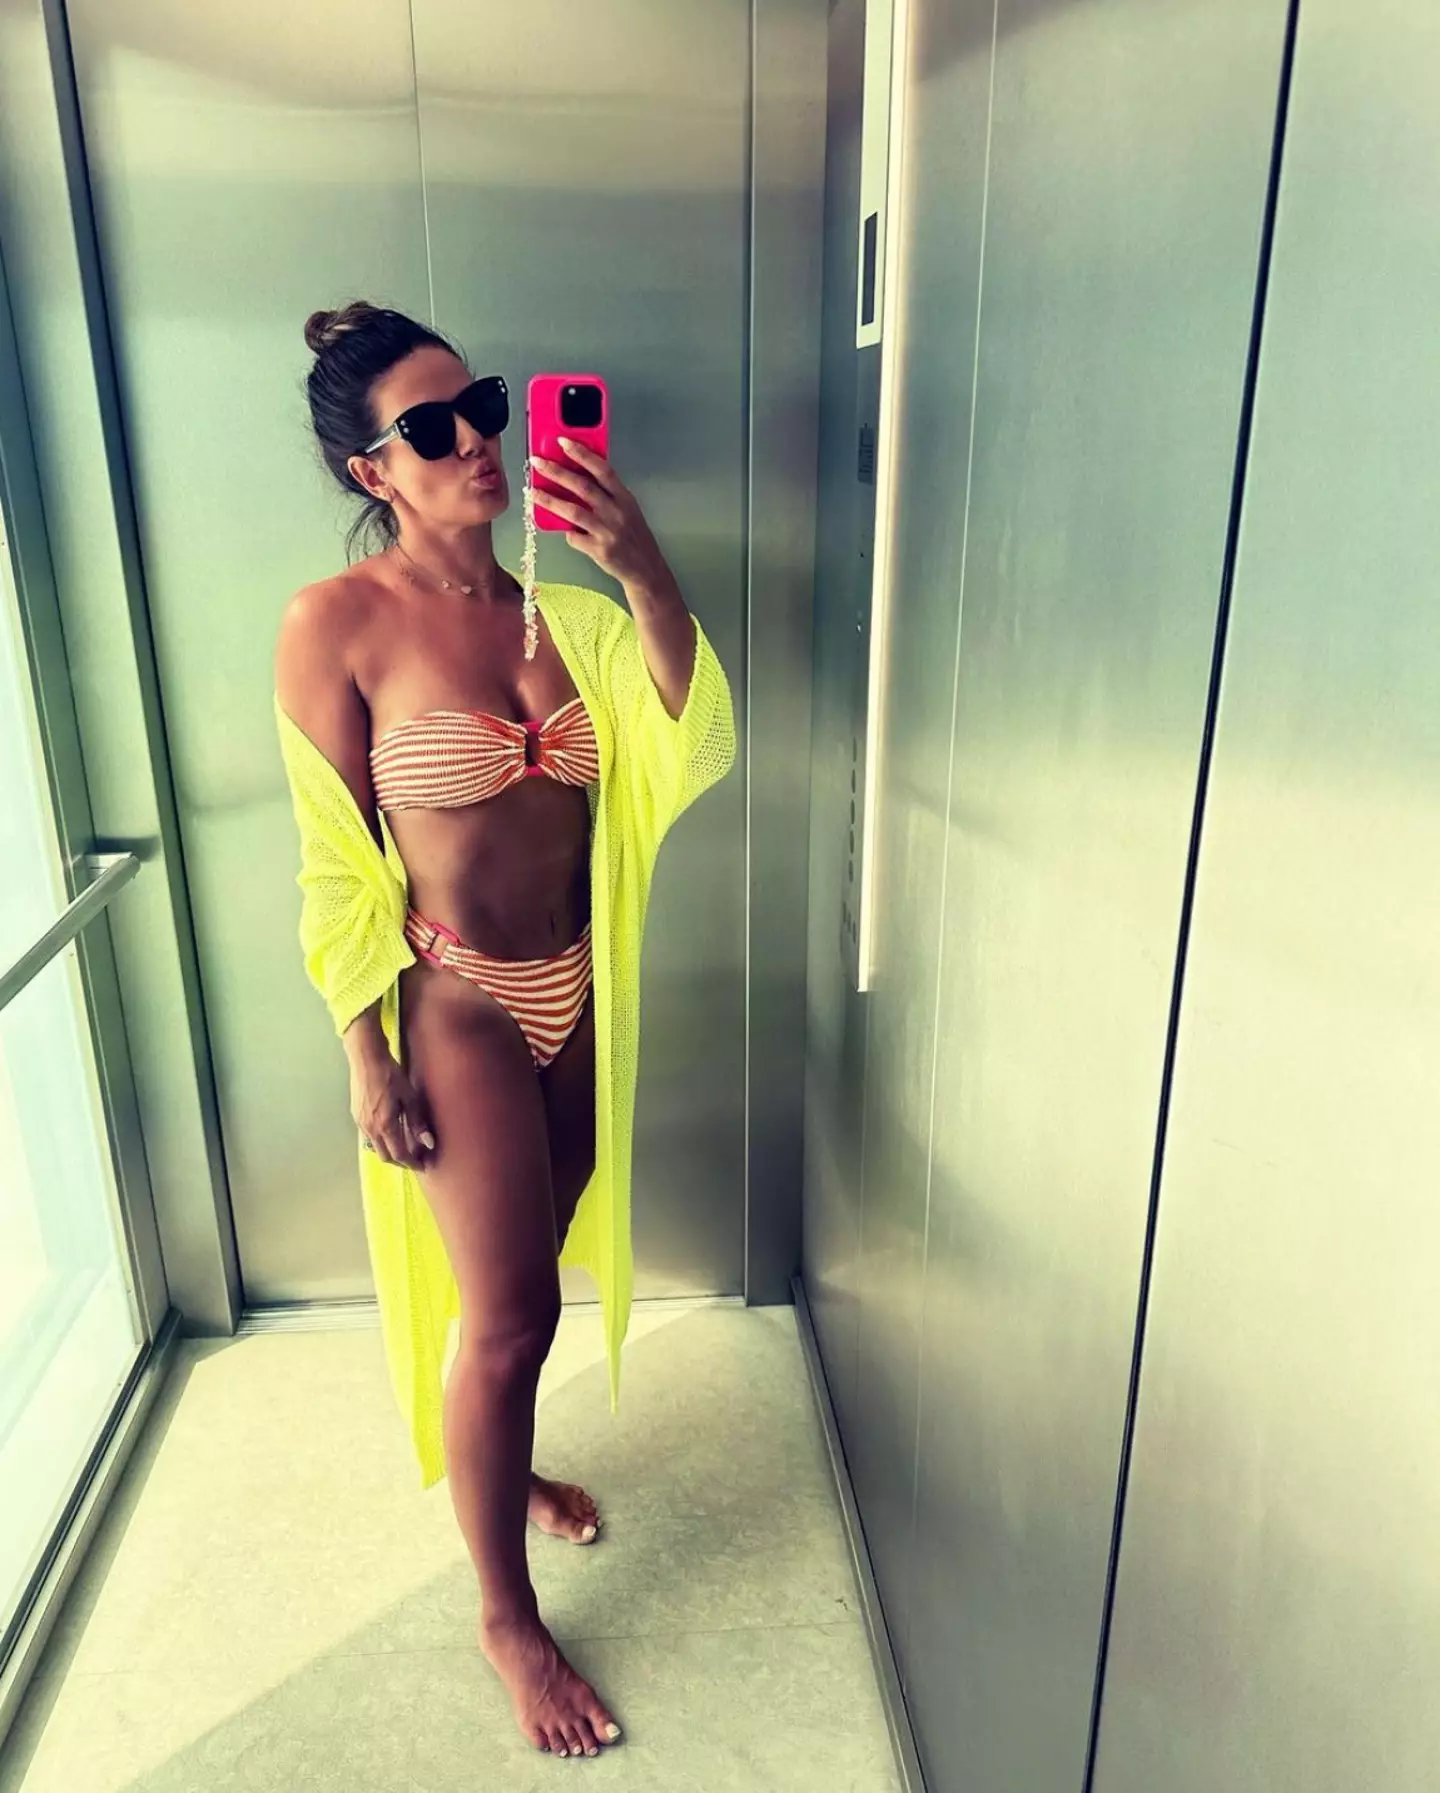 Rebekah Vardy posted a selfie while on holiday in Portugal.